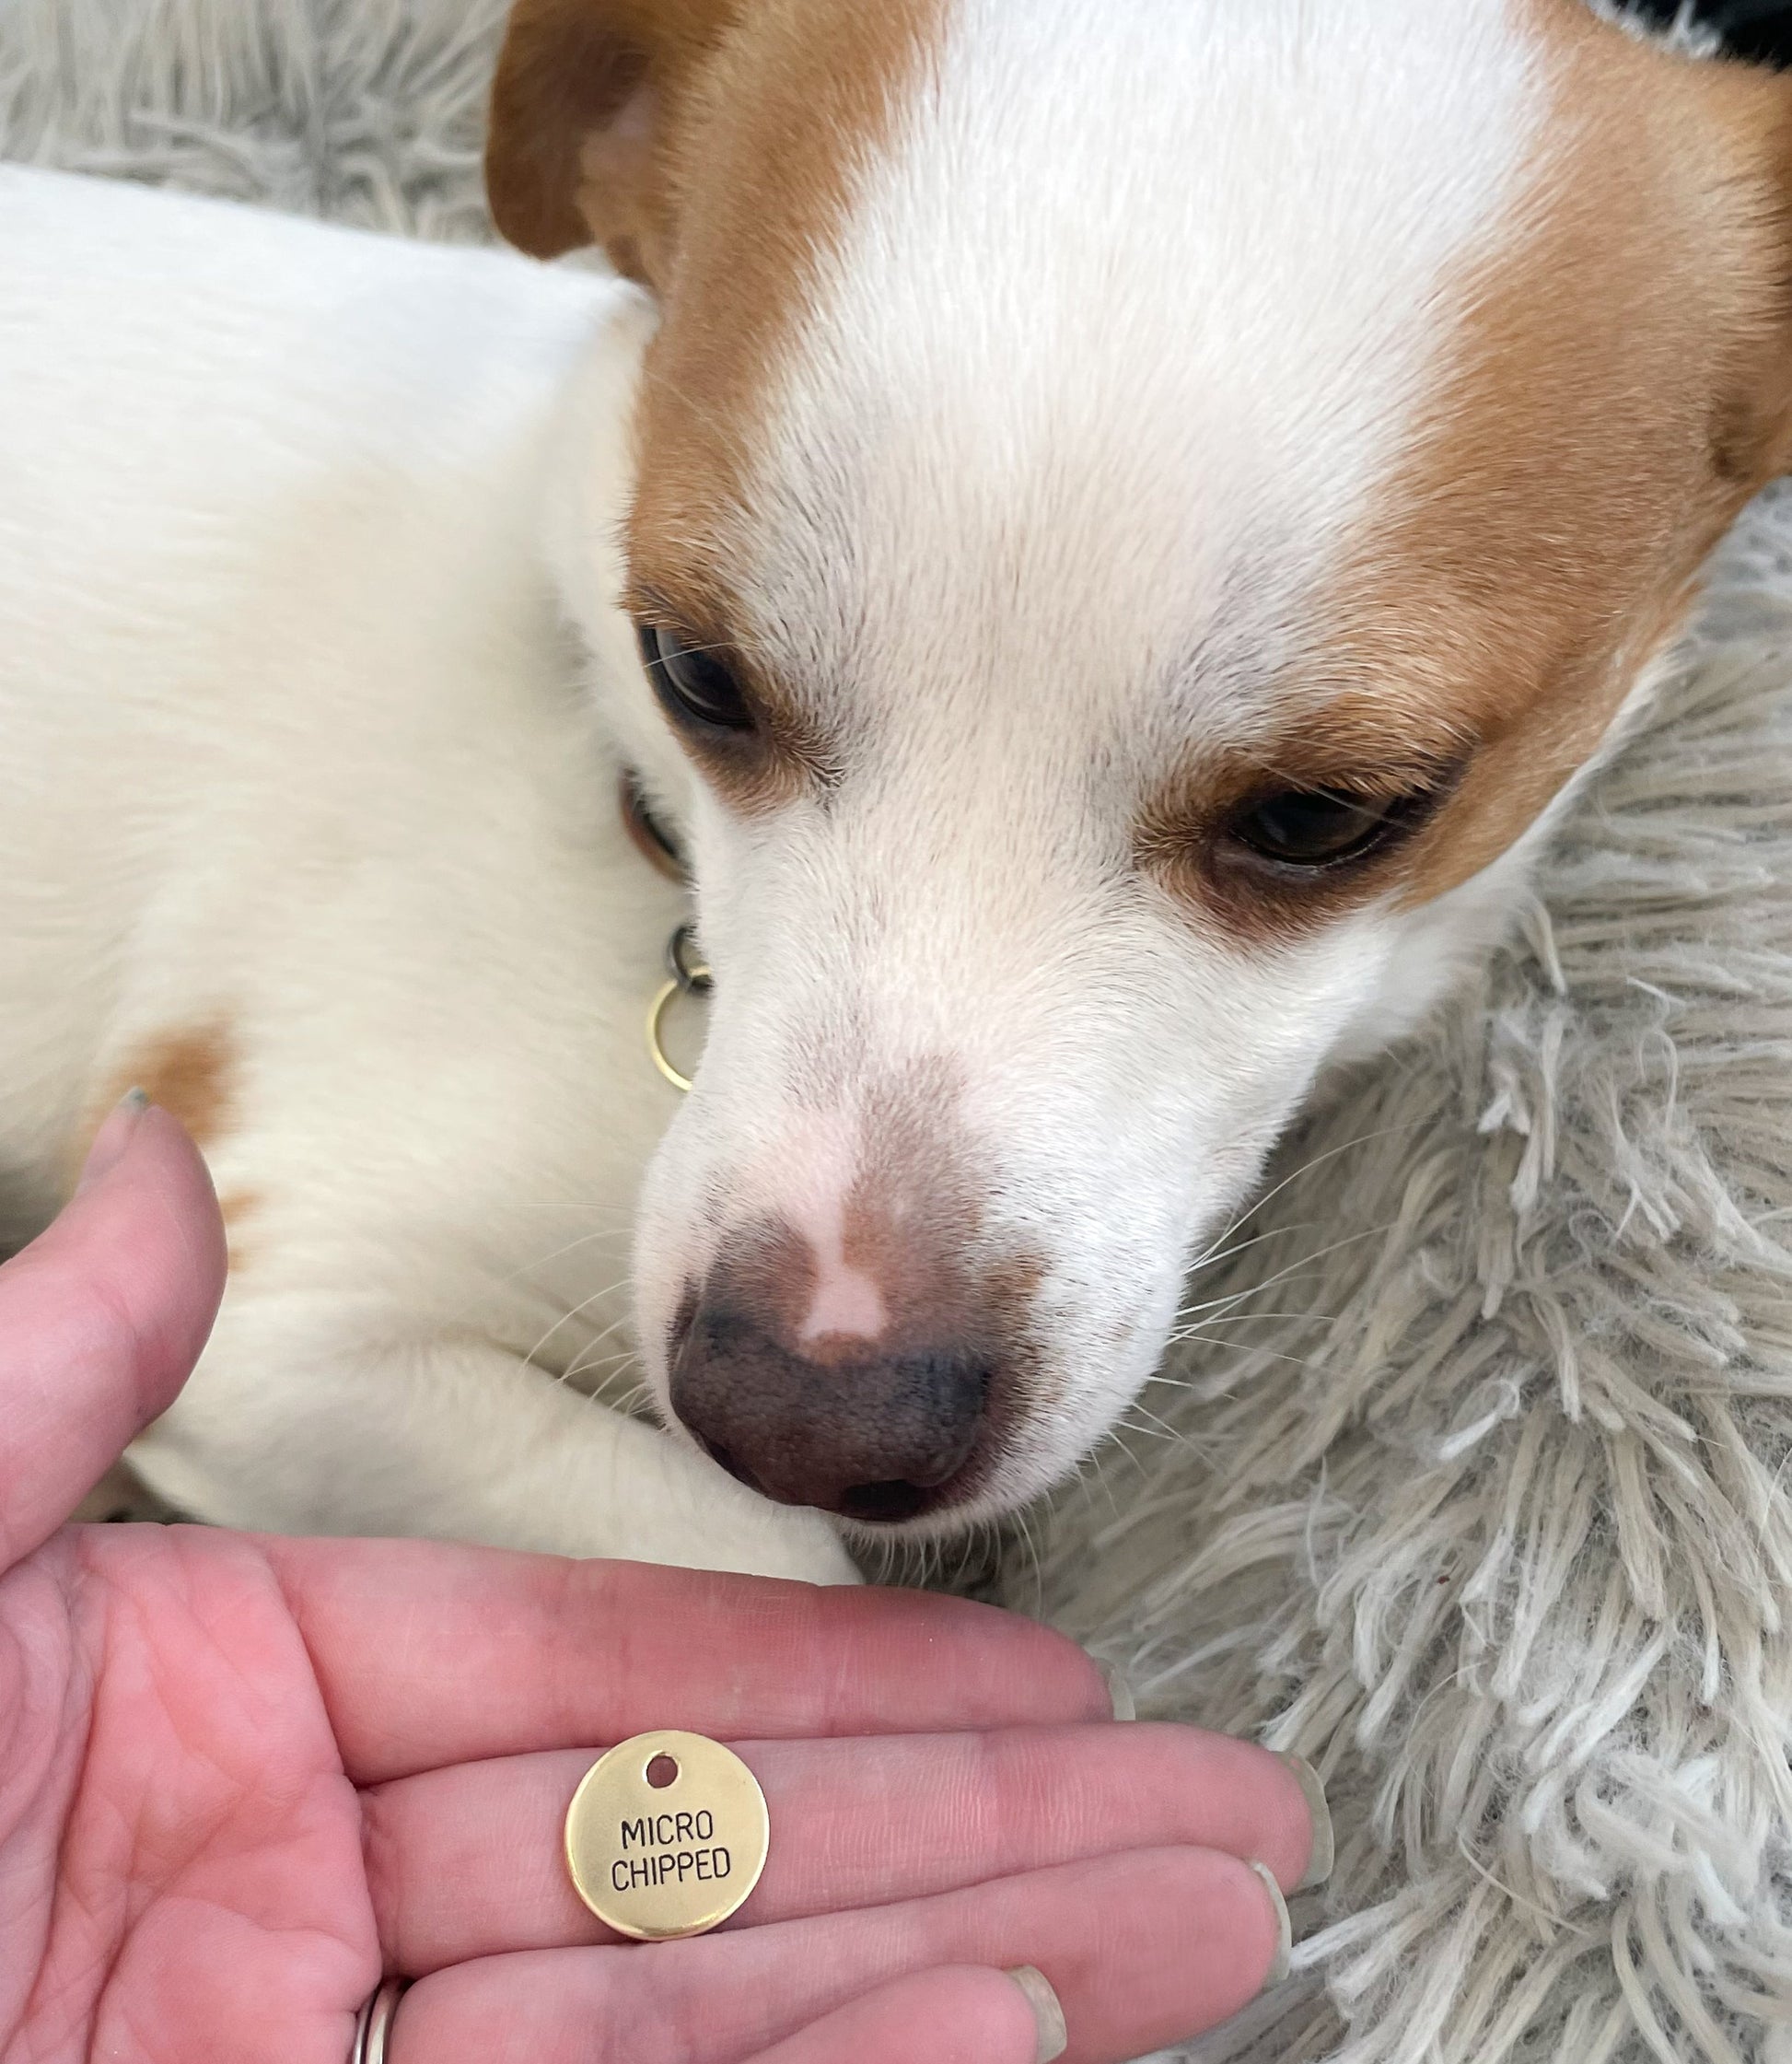 Microchipped Engraved Collar Charm - Microchipped Design Engraved Dog Tag - Cat ID Tag - Dog Collar Tag - Custom Dog Tag - Pet ID Tag - Pet Name Tag - Hand Made Dog Tag - Indoor Dog - Indoor Cat - Outdoor Dog - Outdoor Cat - Epileptic Cat - Epileptic Dog - Vaxxed Dog - Vaxxed Cat - Very Loved Dog 